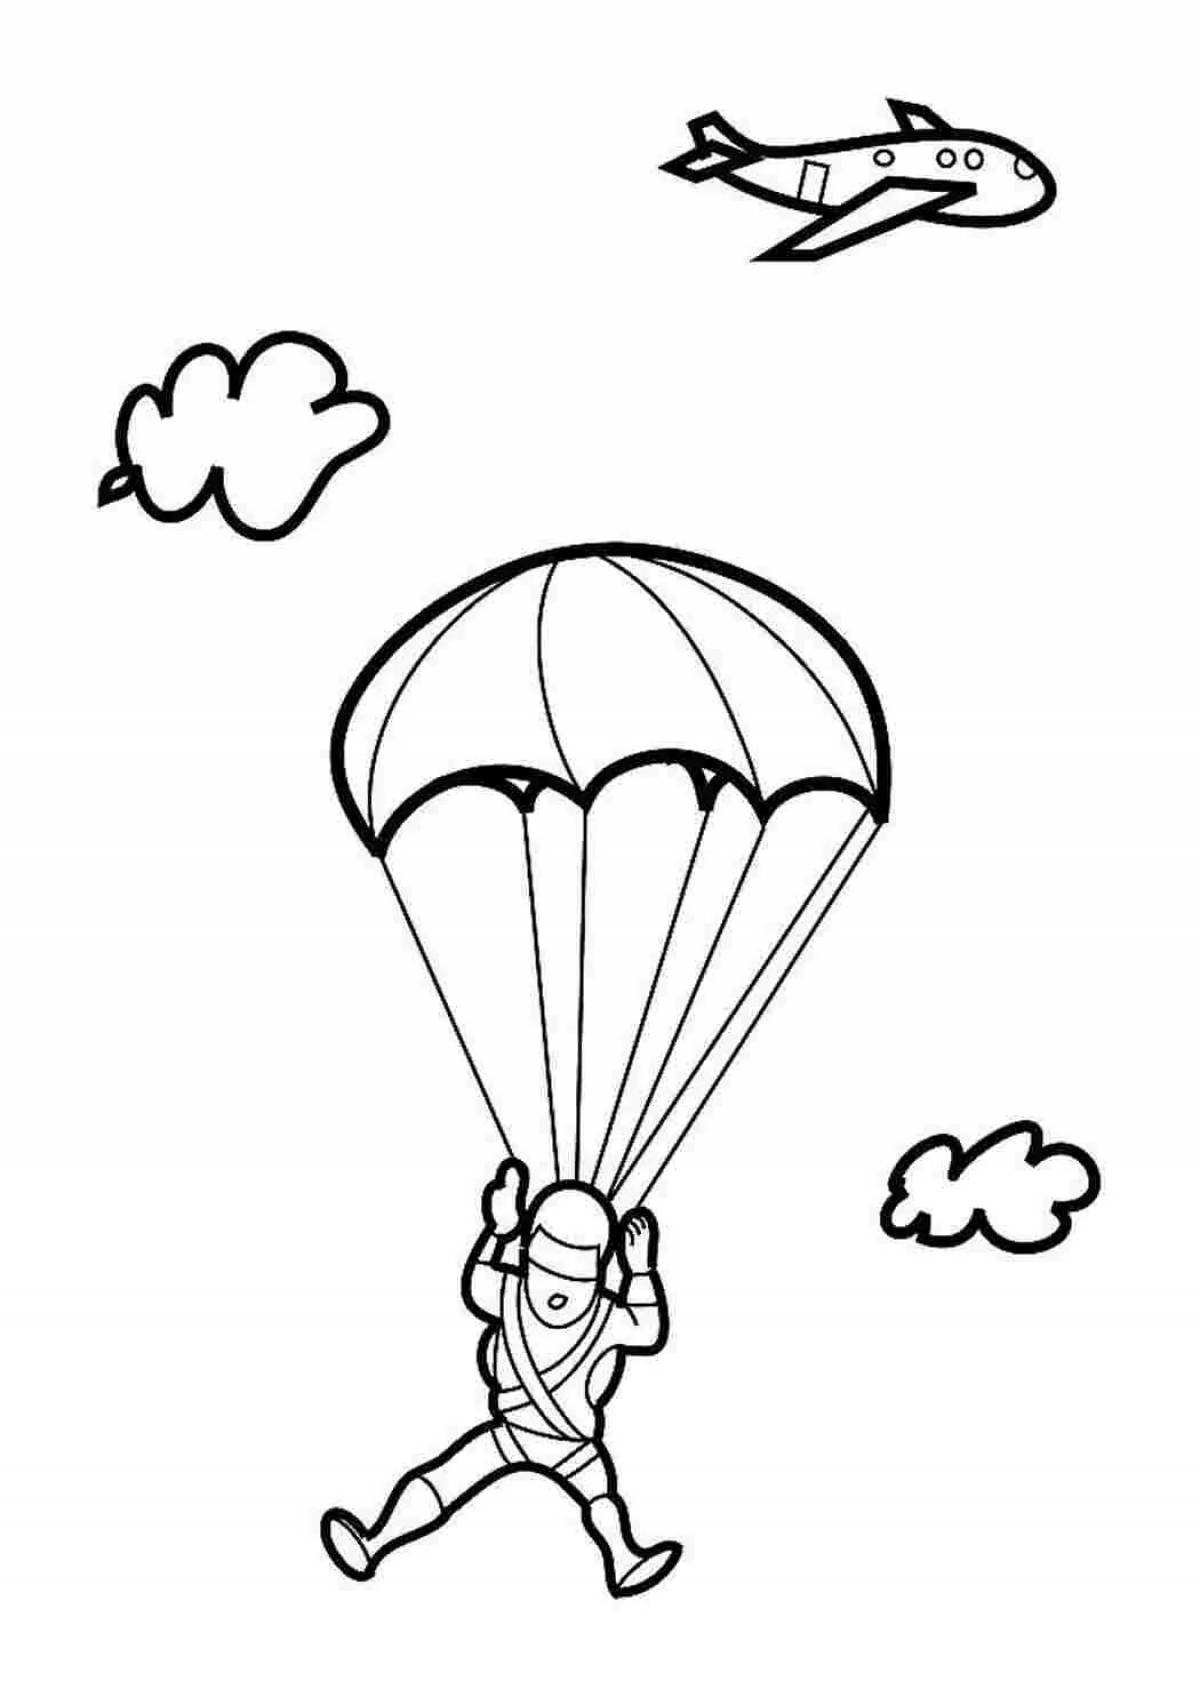 Coloring page superb skydiver